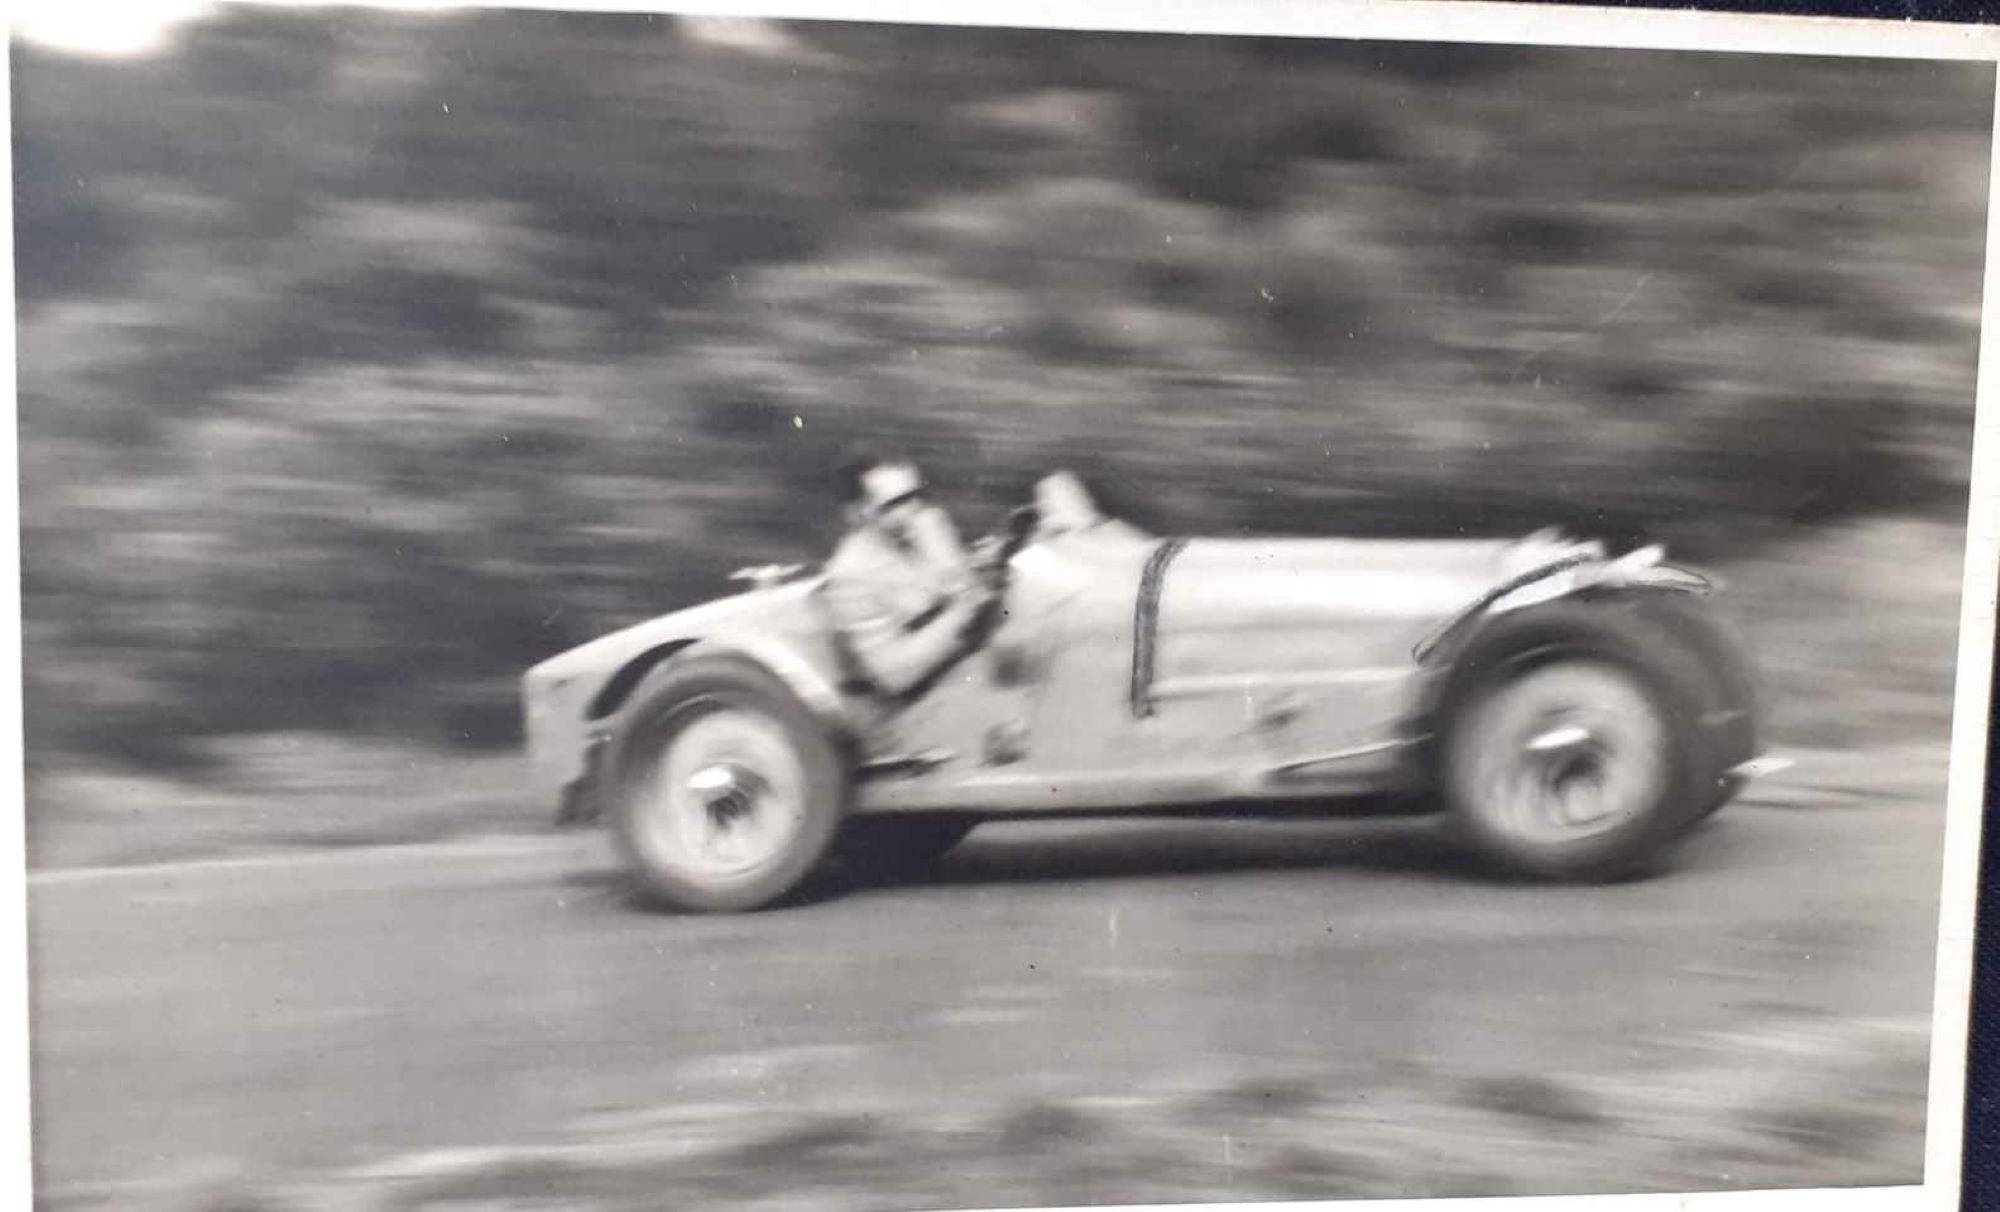 Name:  NSCC 1950 #0116 Bugatti T35 at speed - light colour 1950's - image Graeme Wells arch Anthony Wel.jpg
Views: 220
Size:  158.1 KB